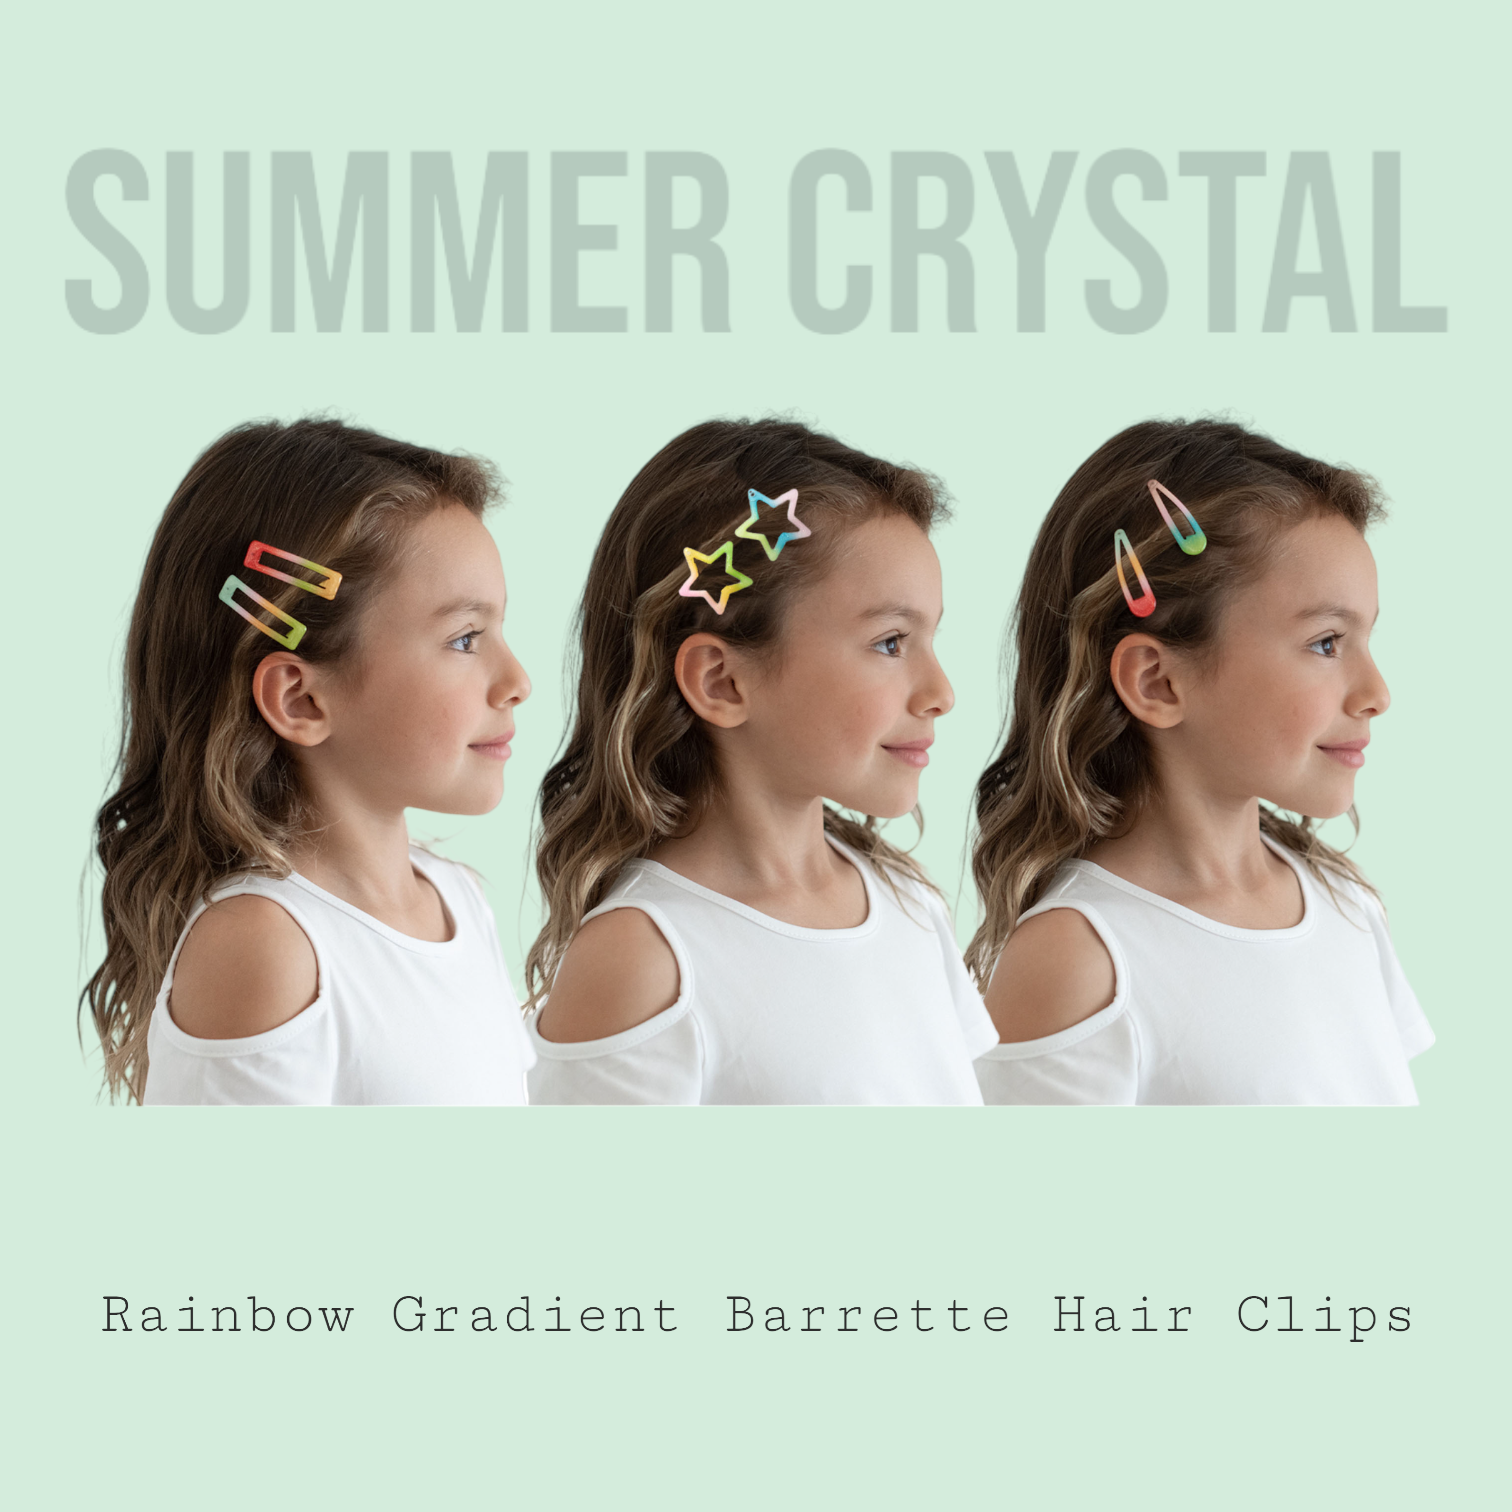 Summer Crystal 2 Inch Barrettes Metal Snap Hair Clips - Rainbow Gradient - Pack of 30